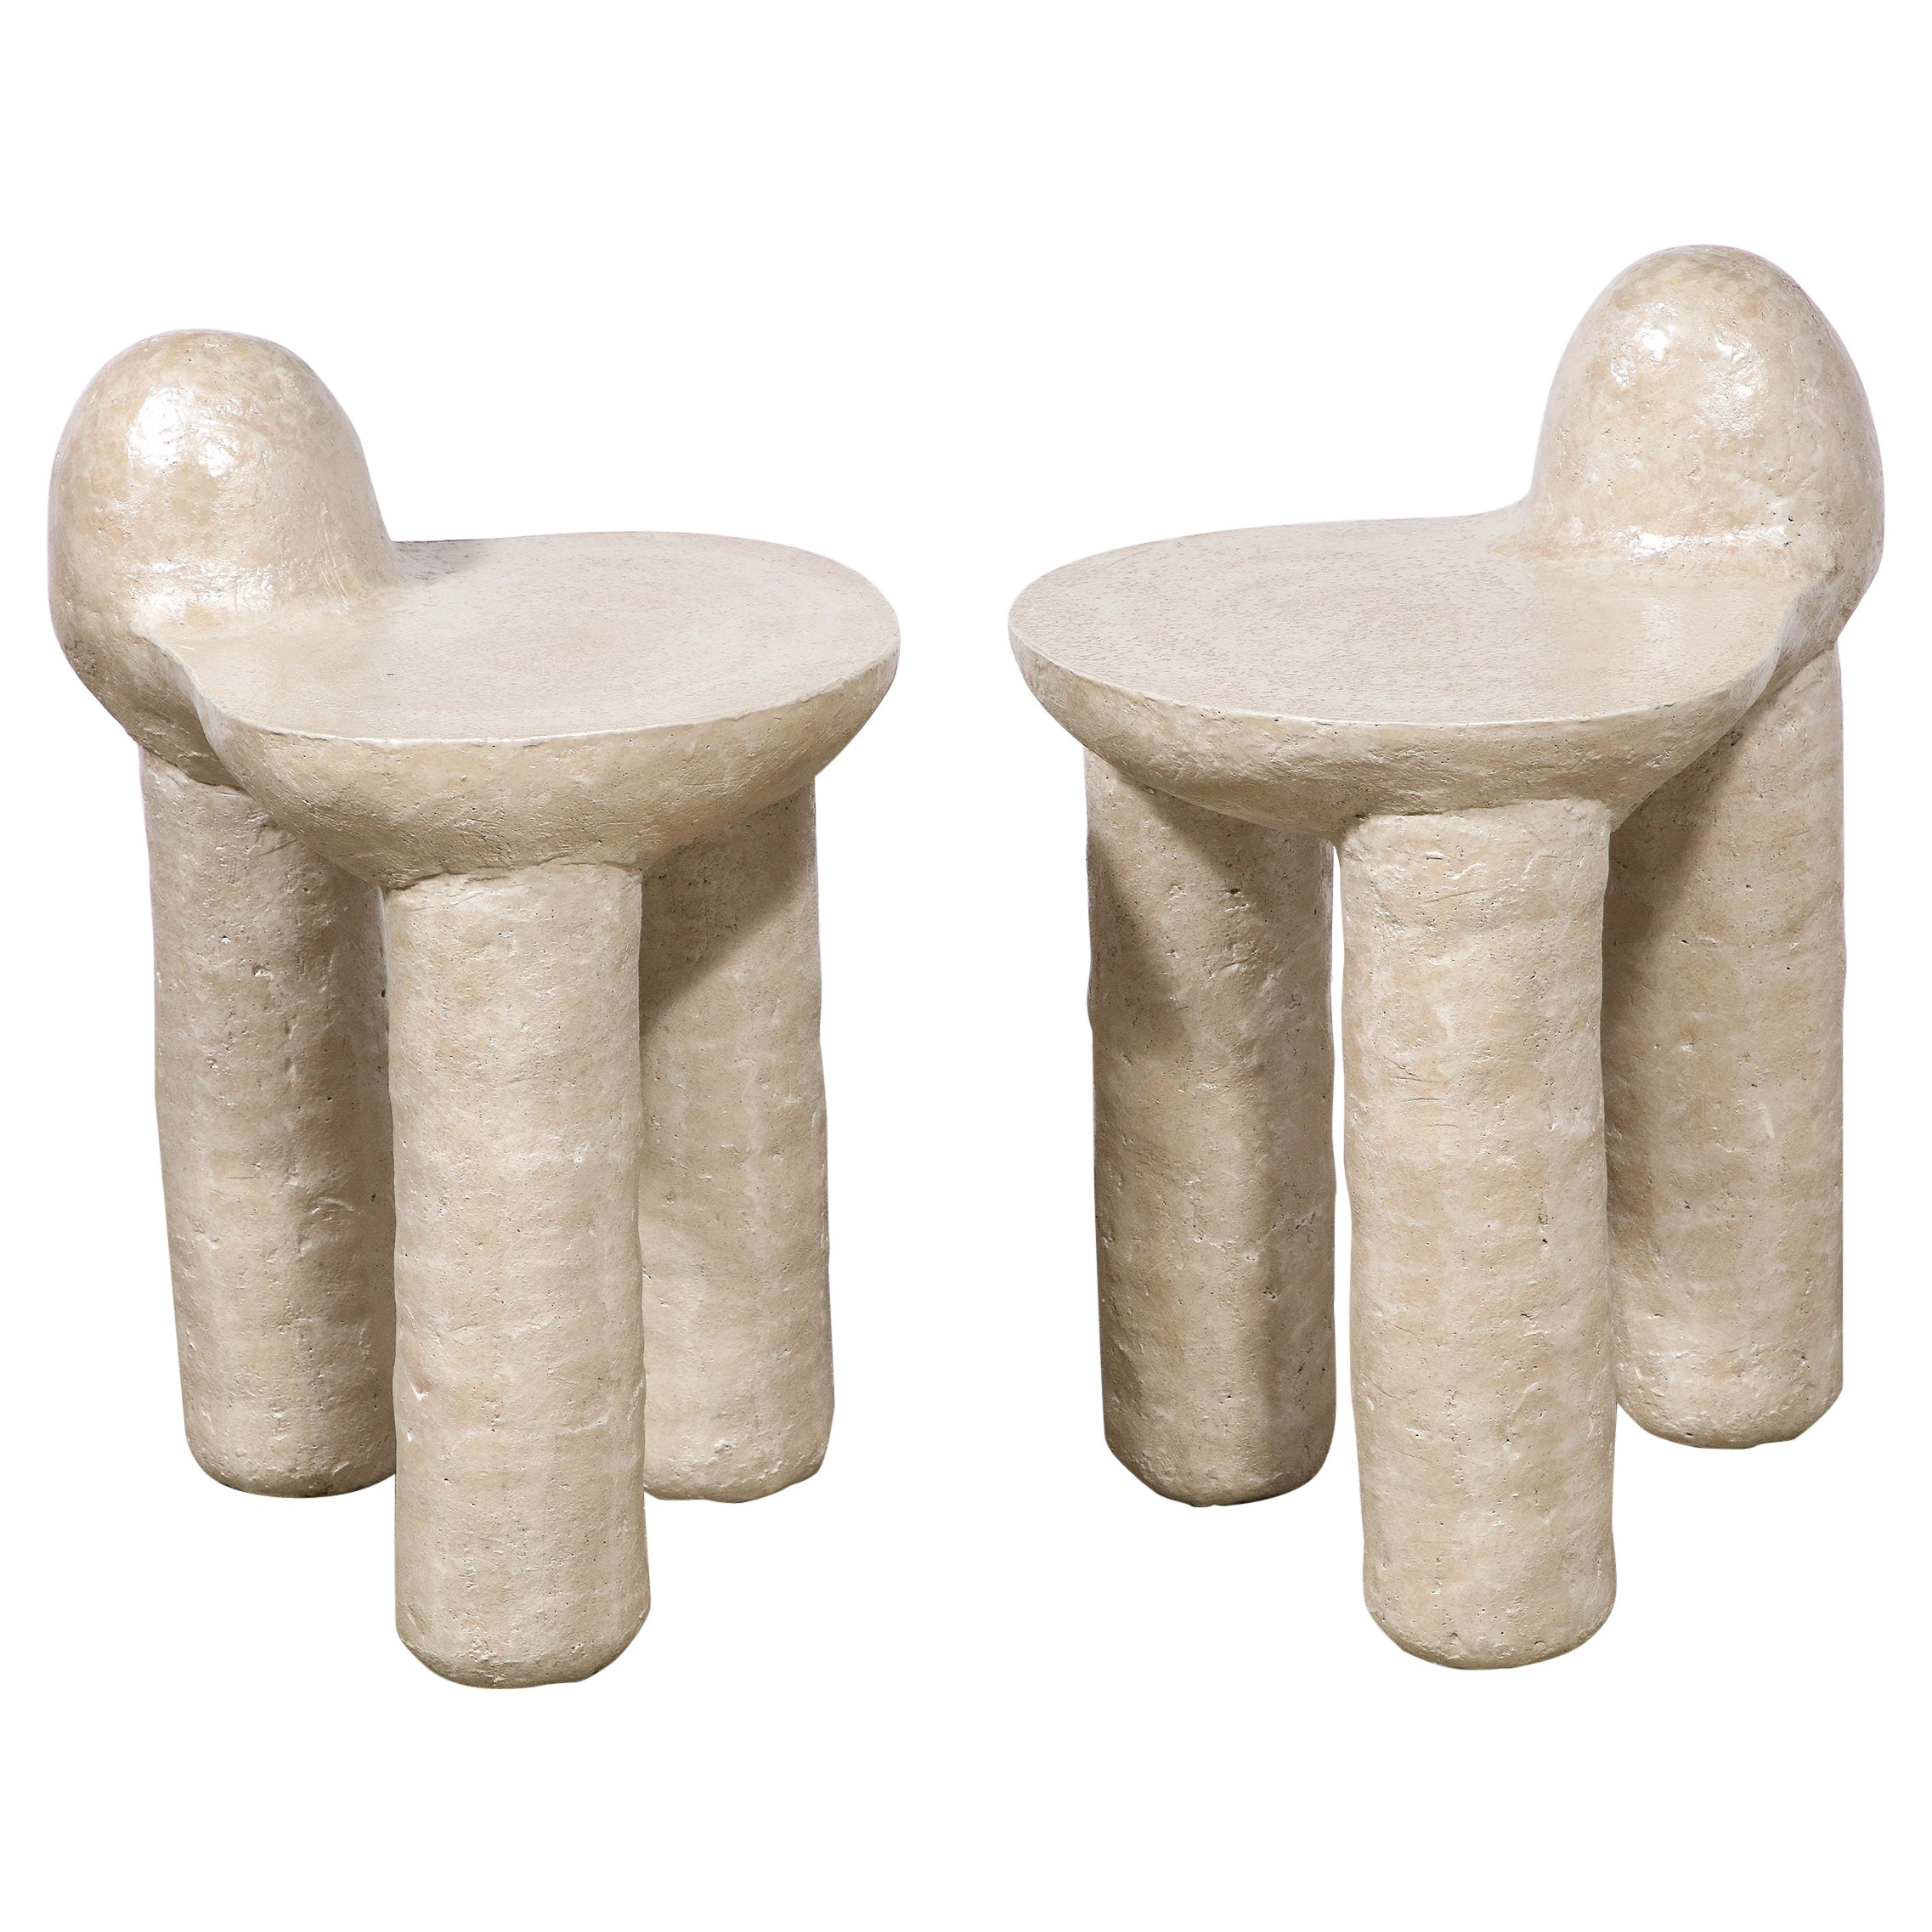 Pair of Pearl Nube Chairs by River Valadez